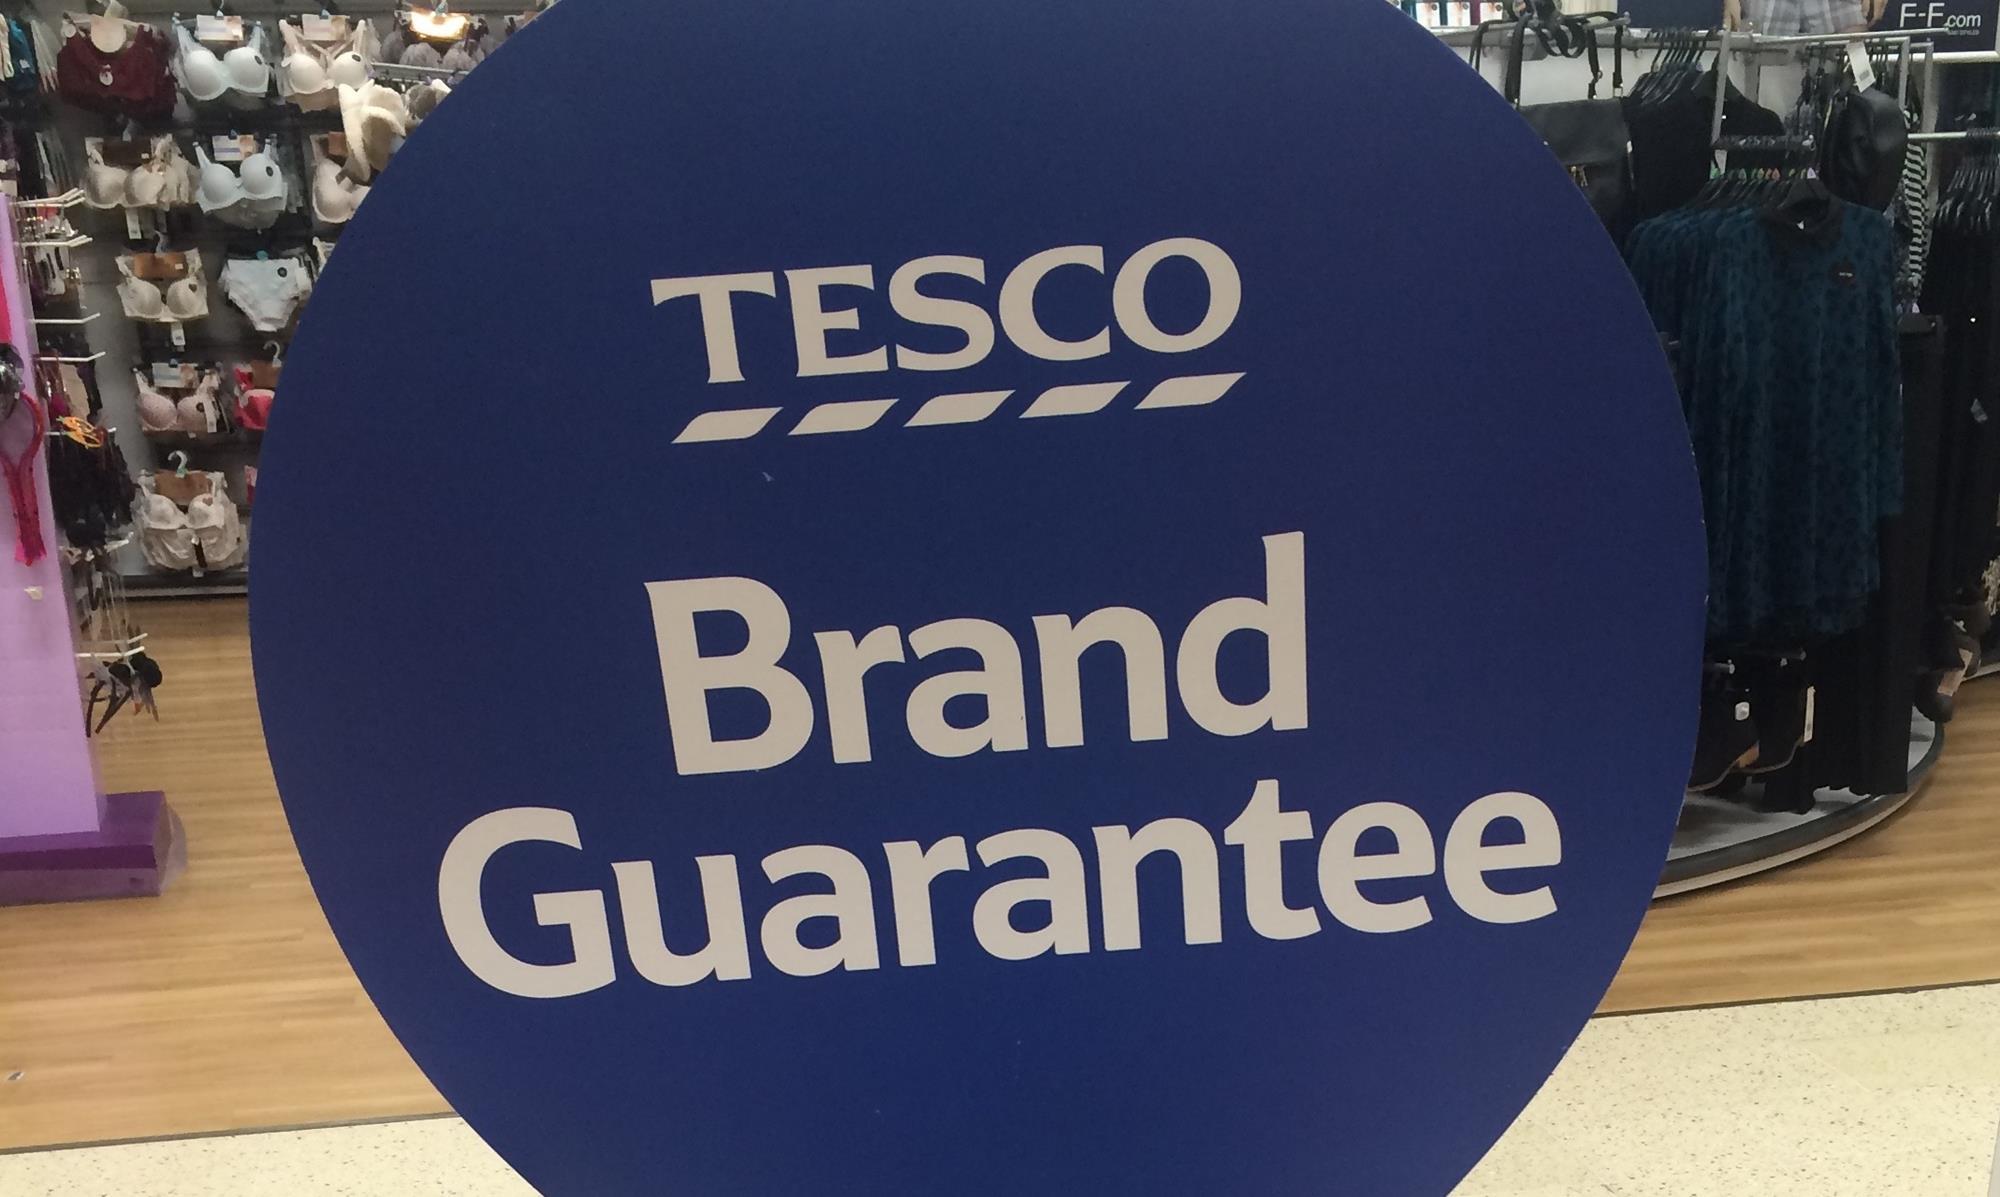 Analysis: Everything you need to know about Tesco's Brand Guarantee, Analysis